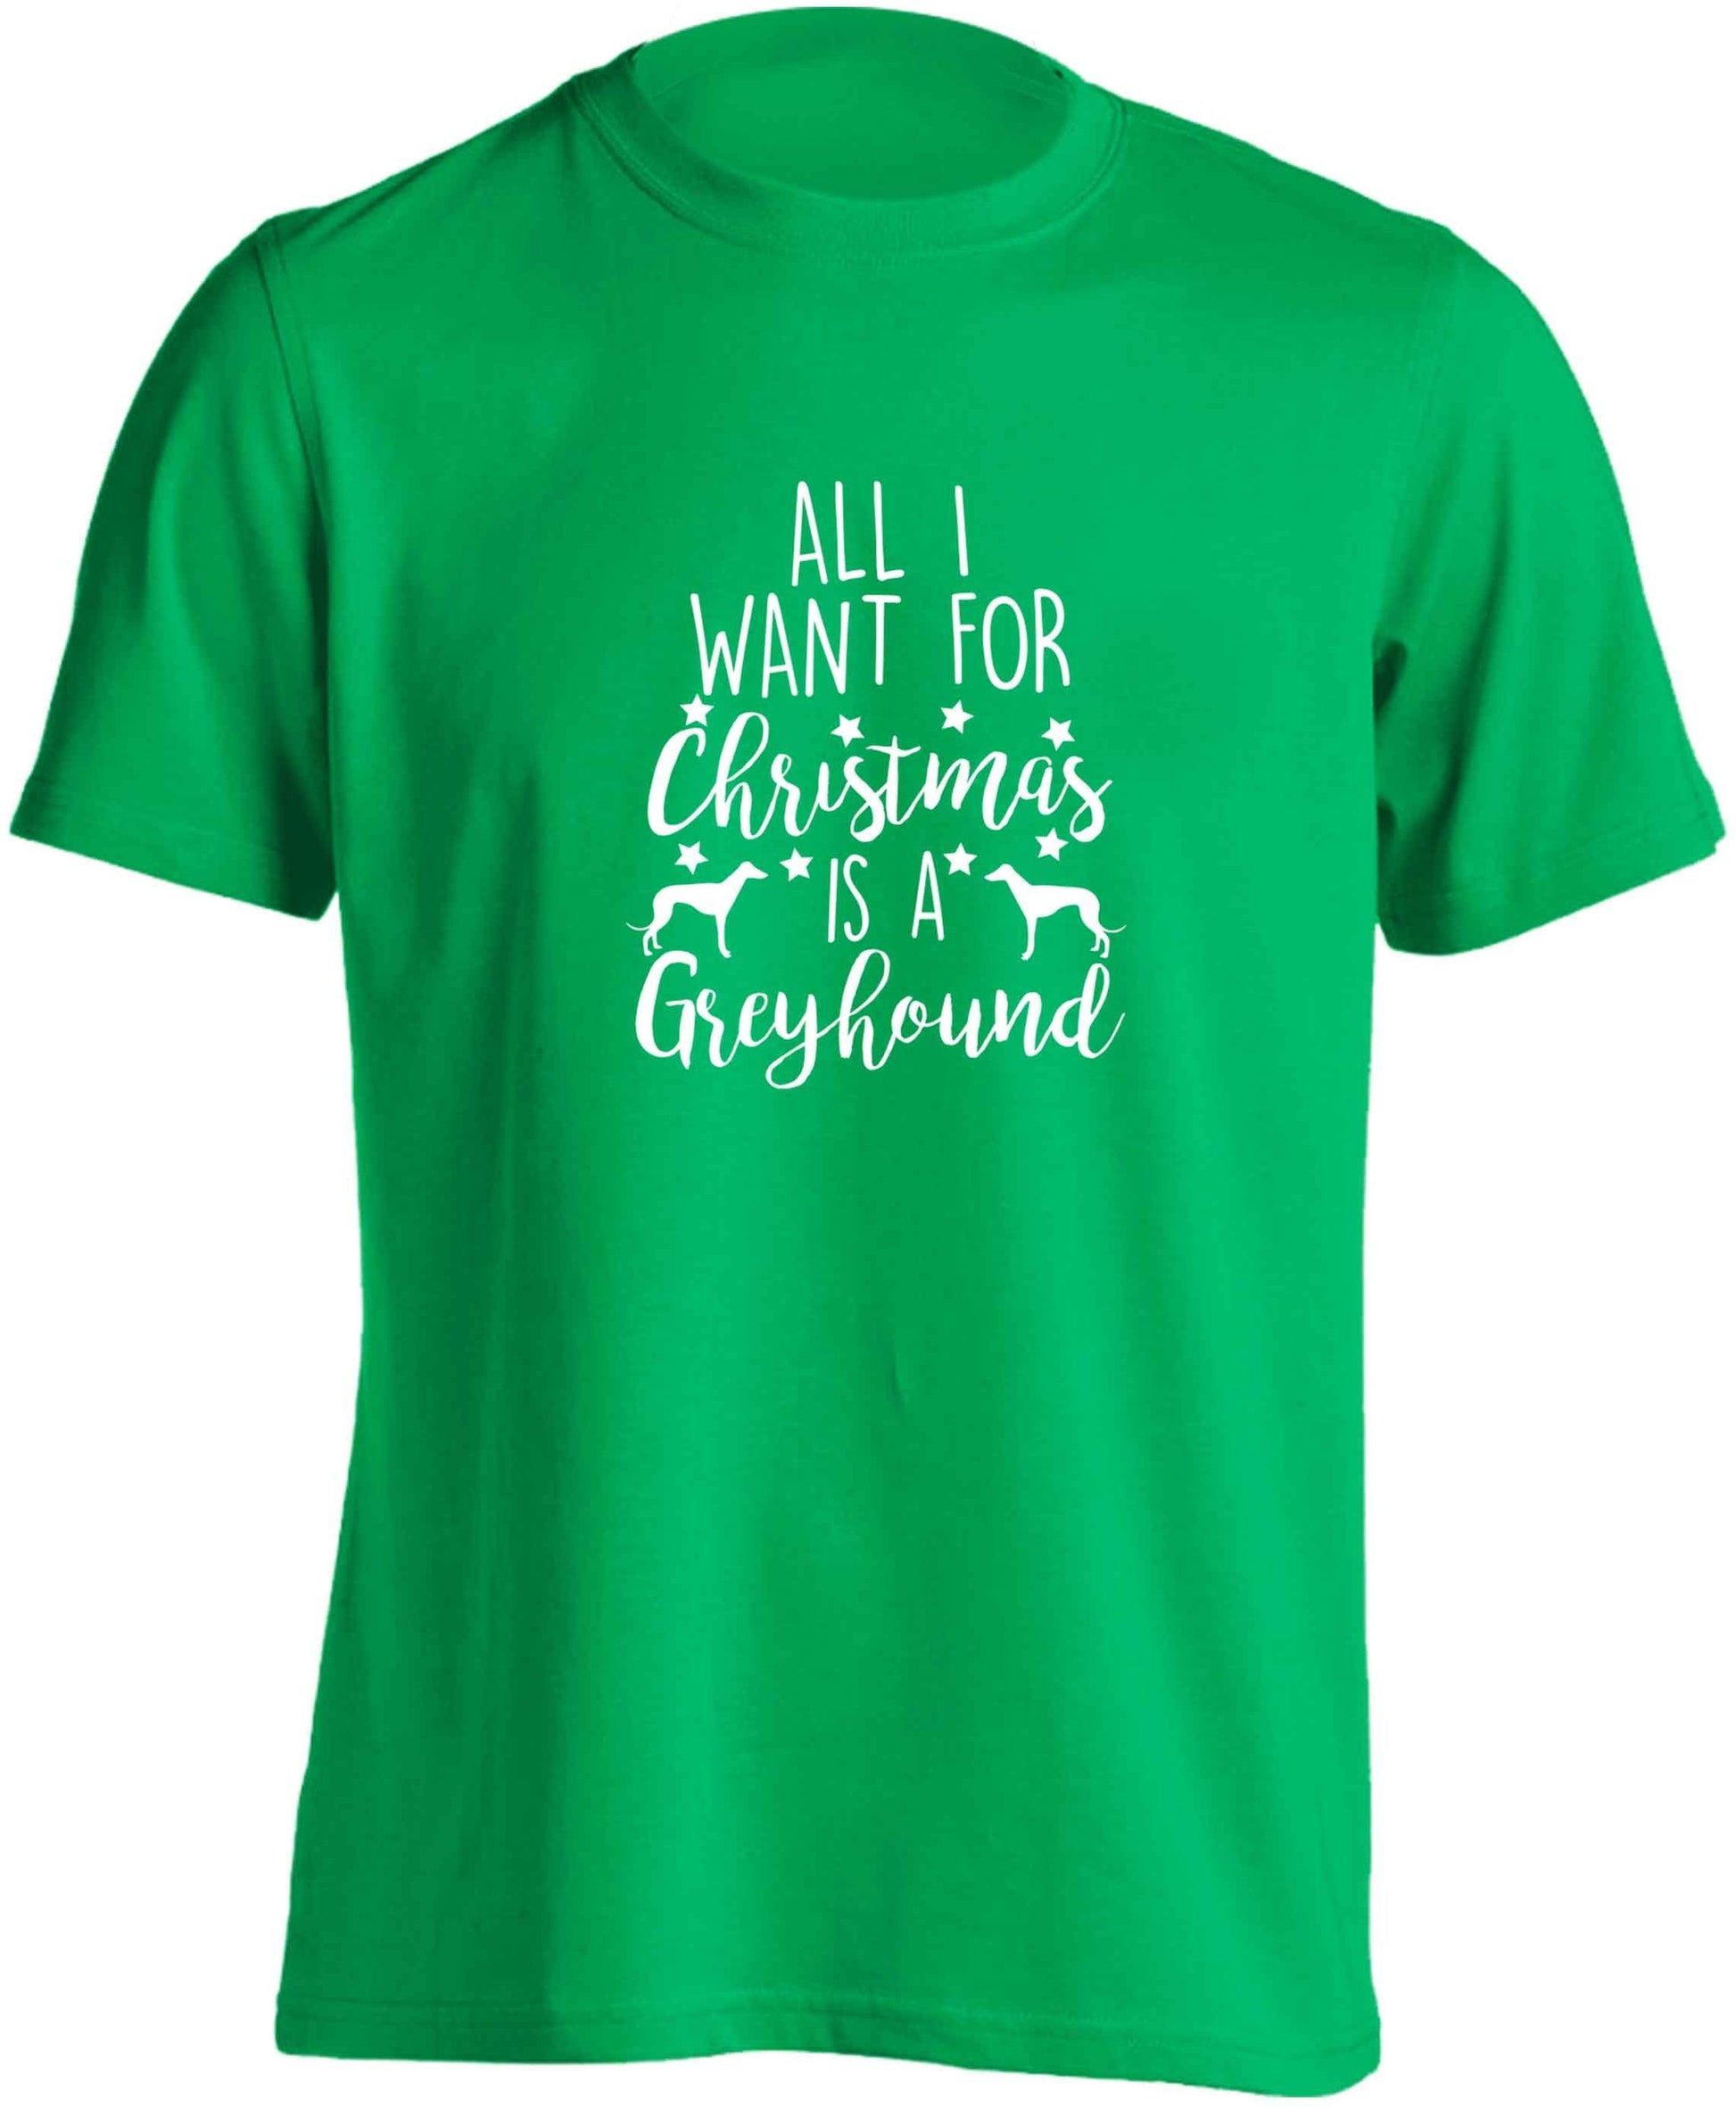 All I want for Christmas is a greyhound adults unisex green Tshirt 2XL